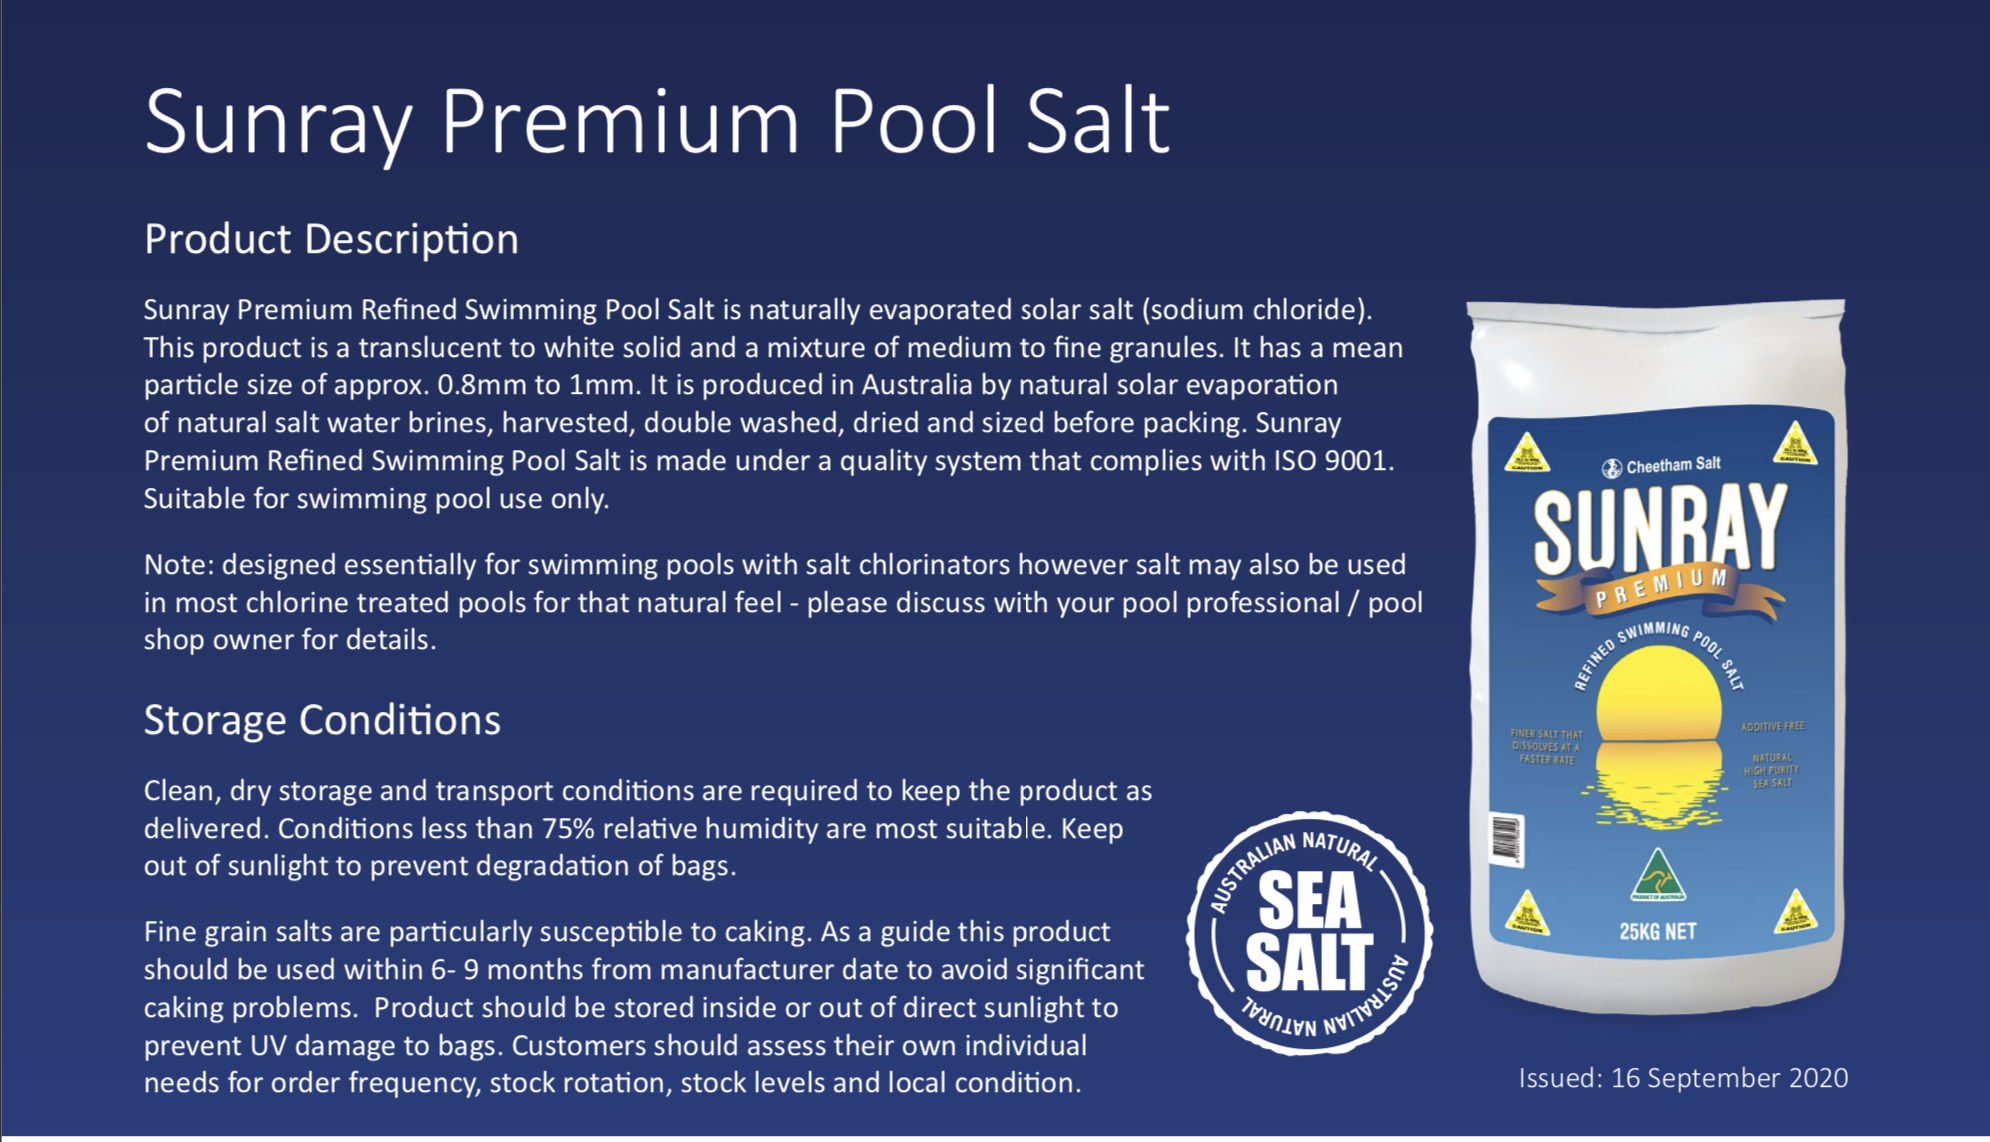 Sunray Premium Pool Salt product description. This product description includes an image of the product along with a seal that states 